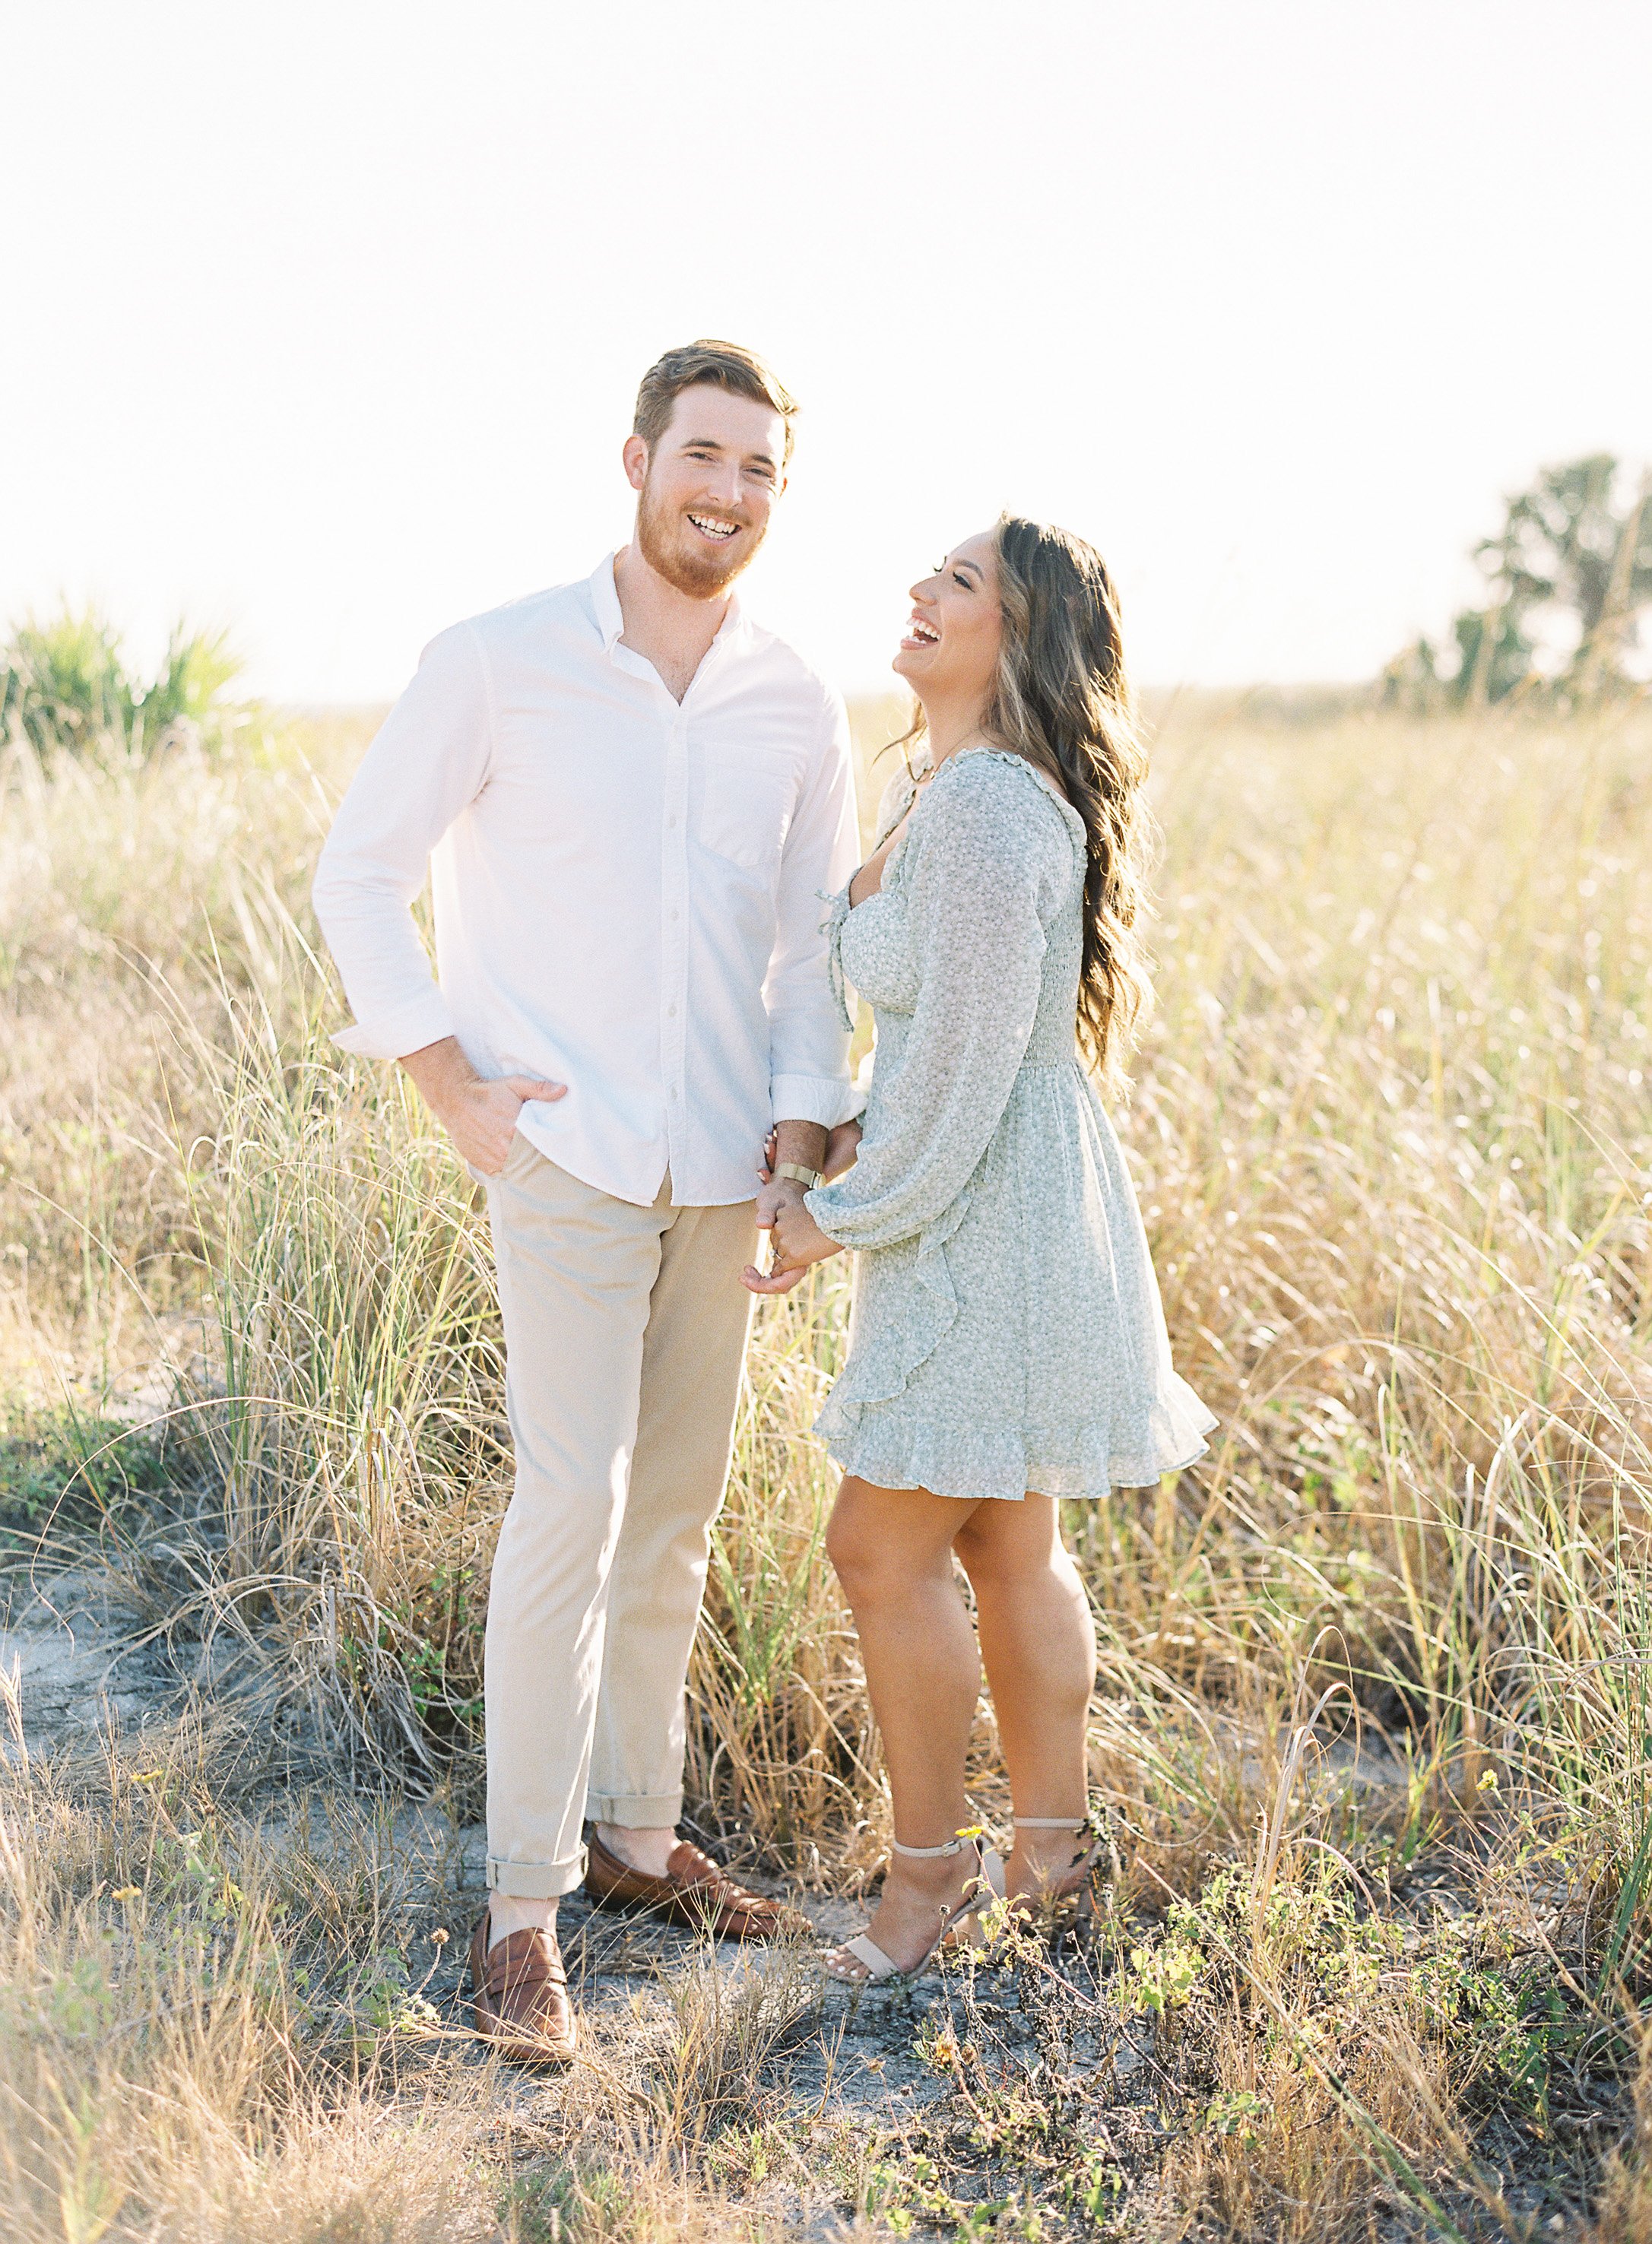 Tips for Amazing Engagement Photos from Florida's Best Photographers